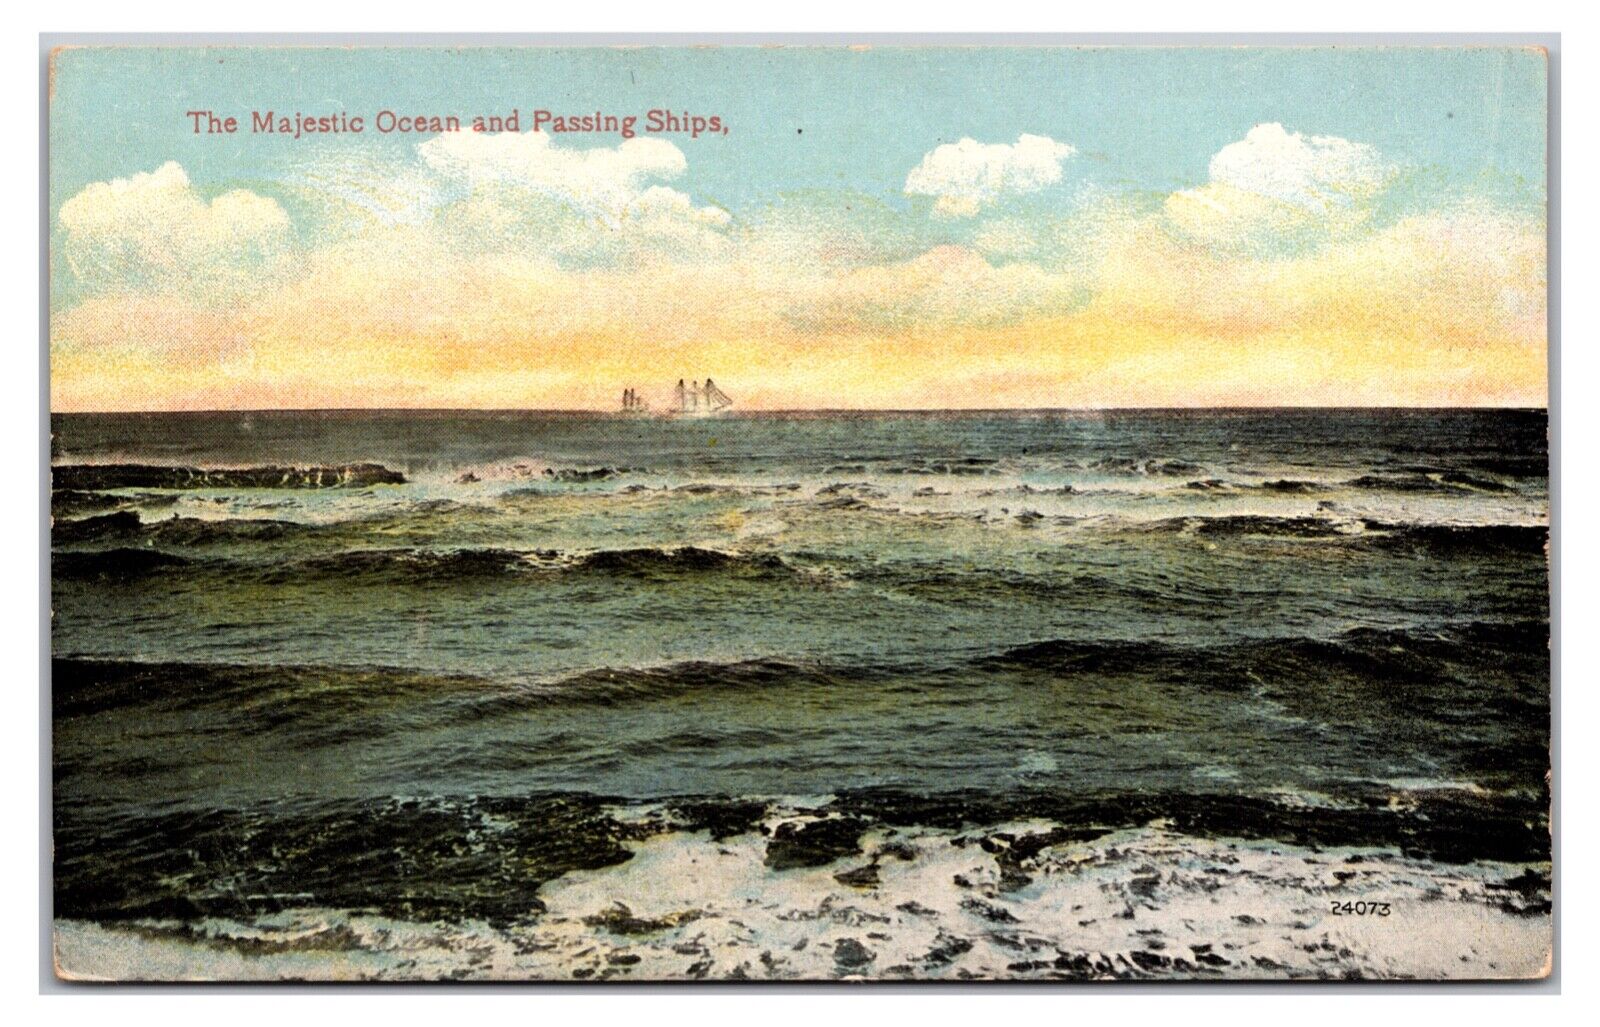 Early 1900s-  The Majestic Ocean and Passing Ships- Atlantic Ocean Postcard